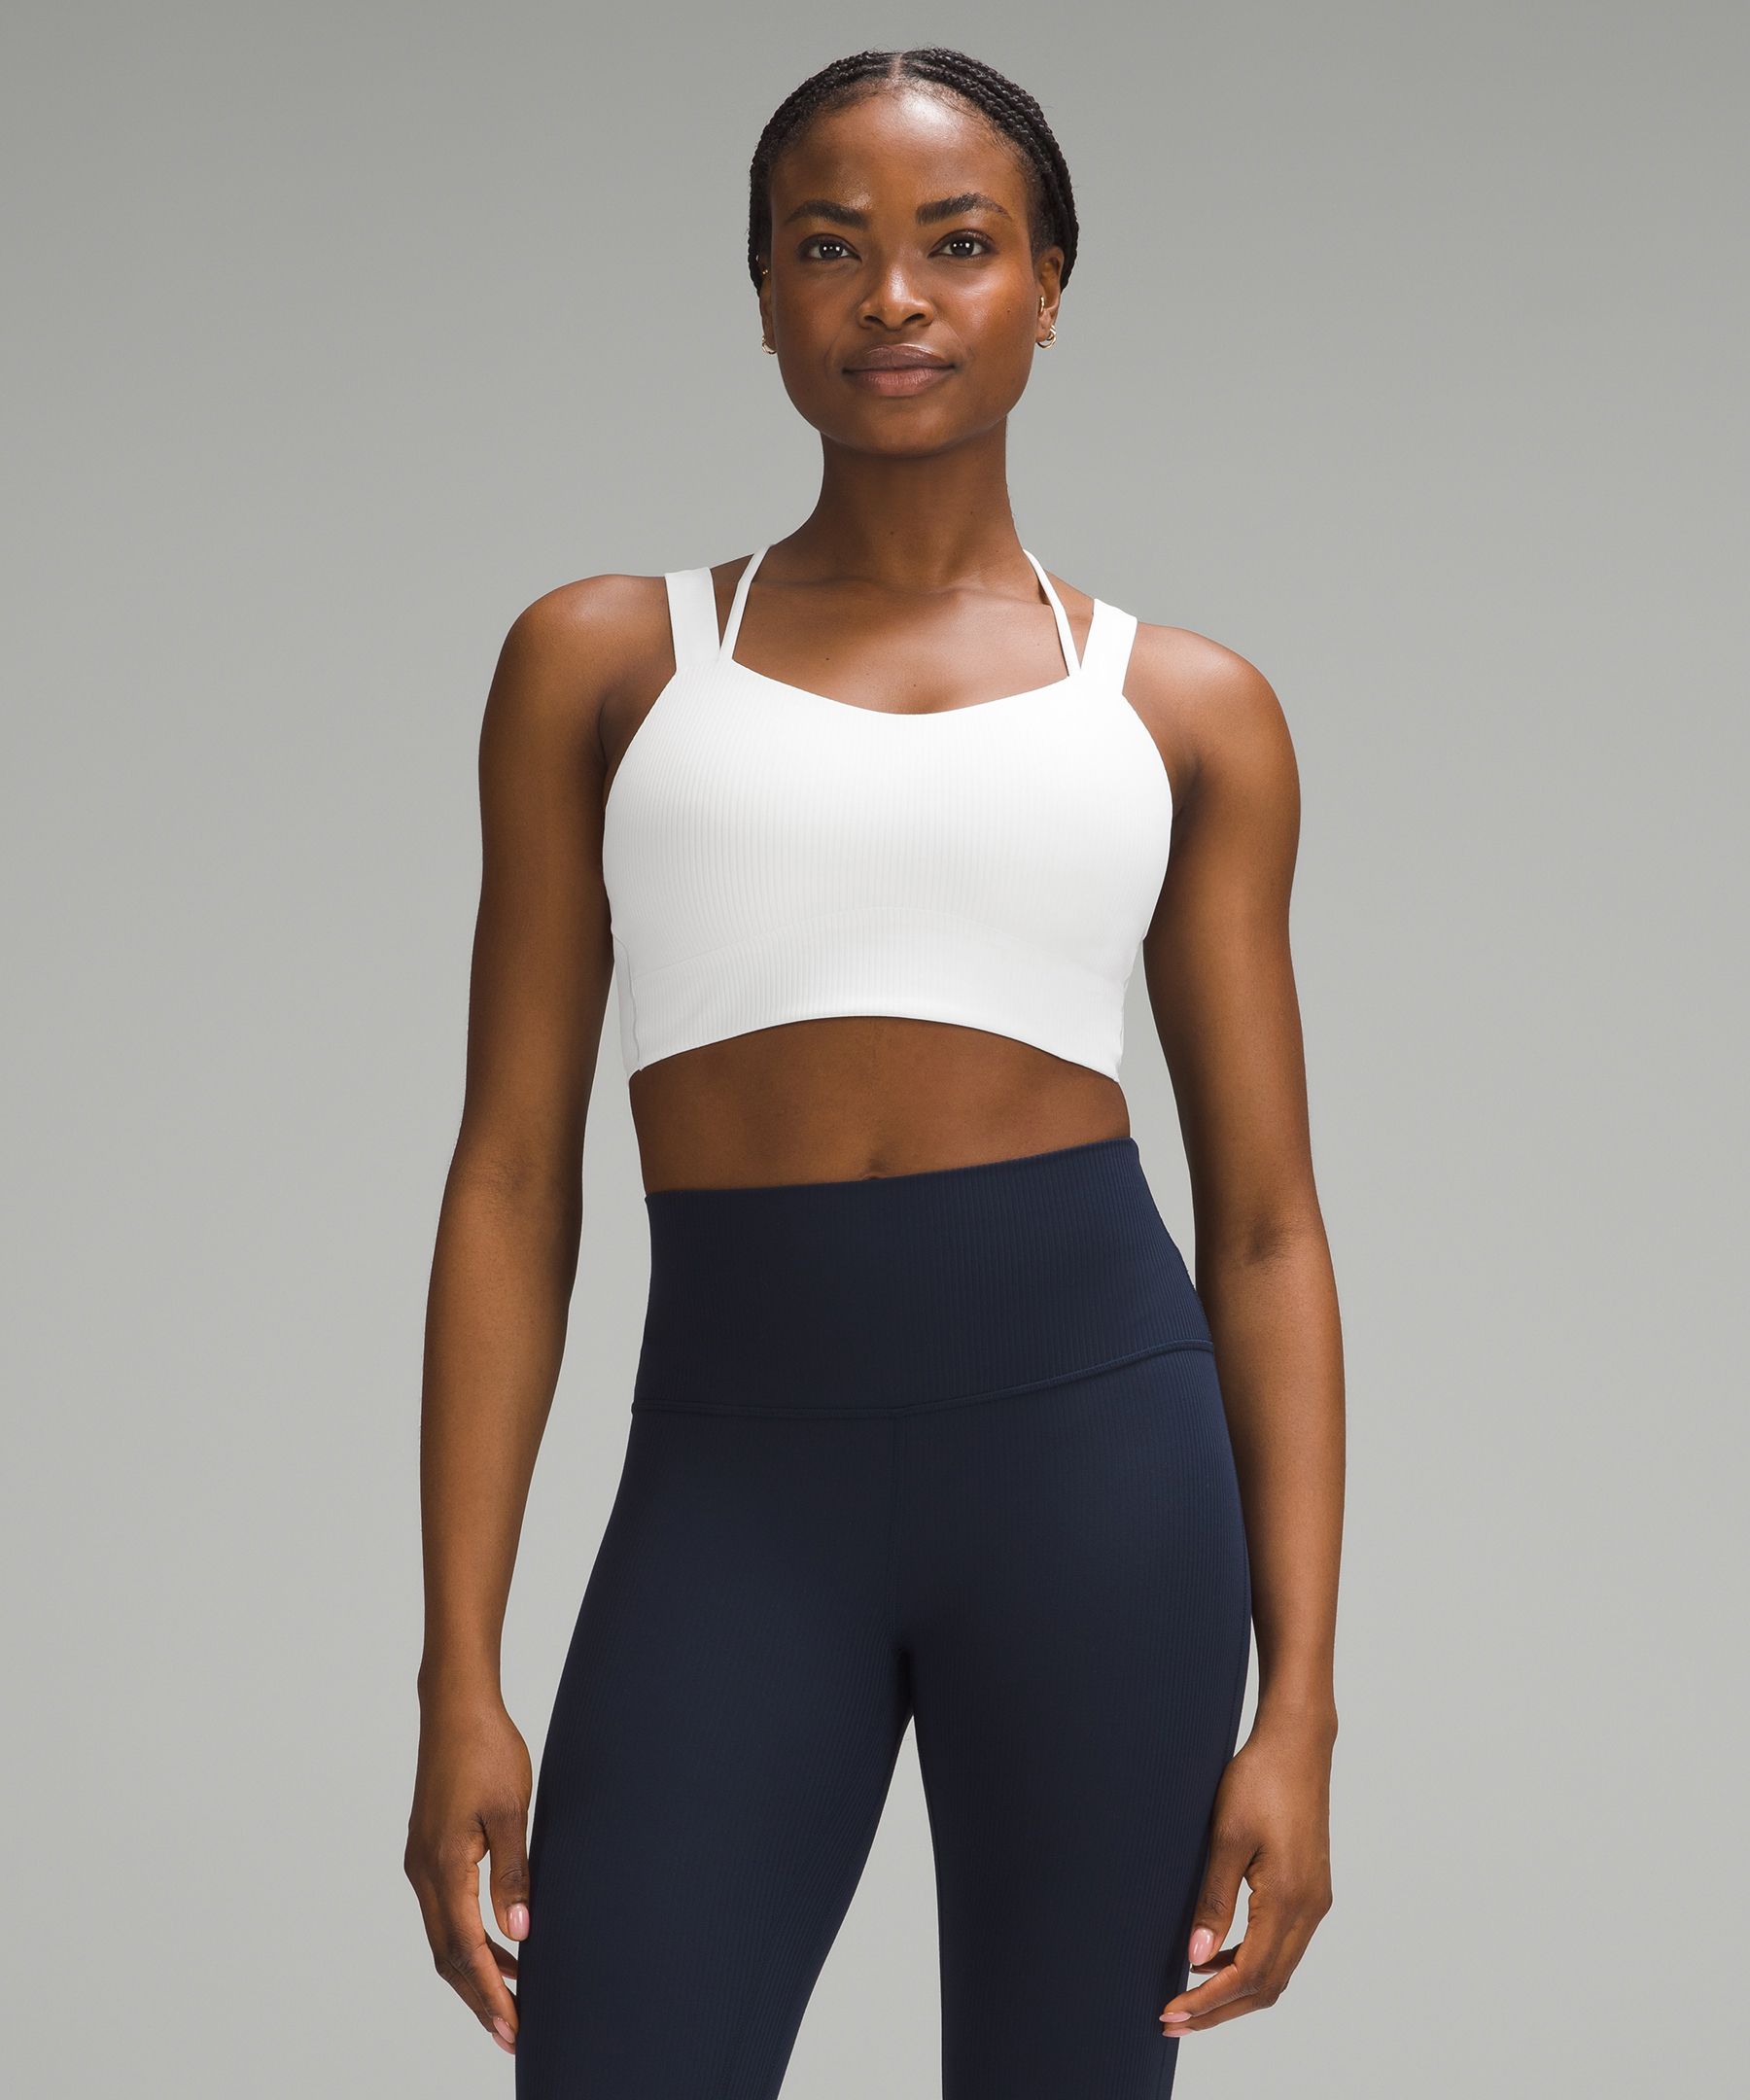 Lululemon shoppers are calling this the 'glass slipper of sports bras